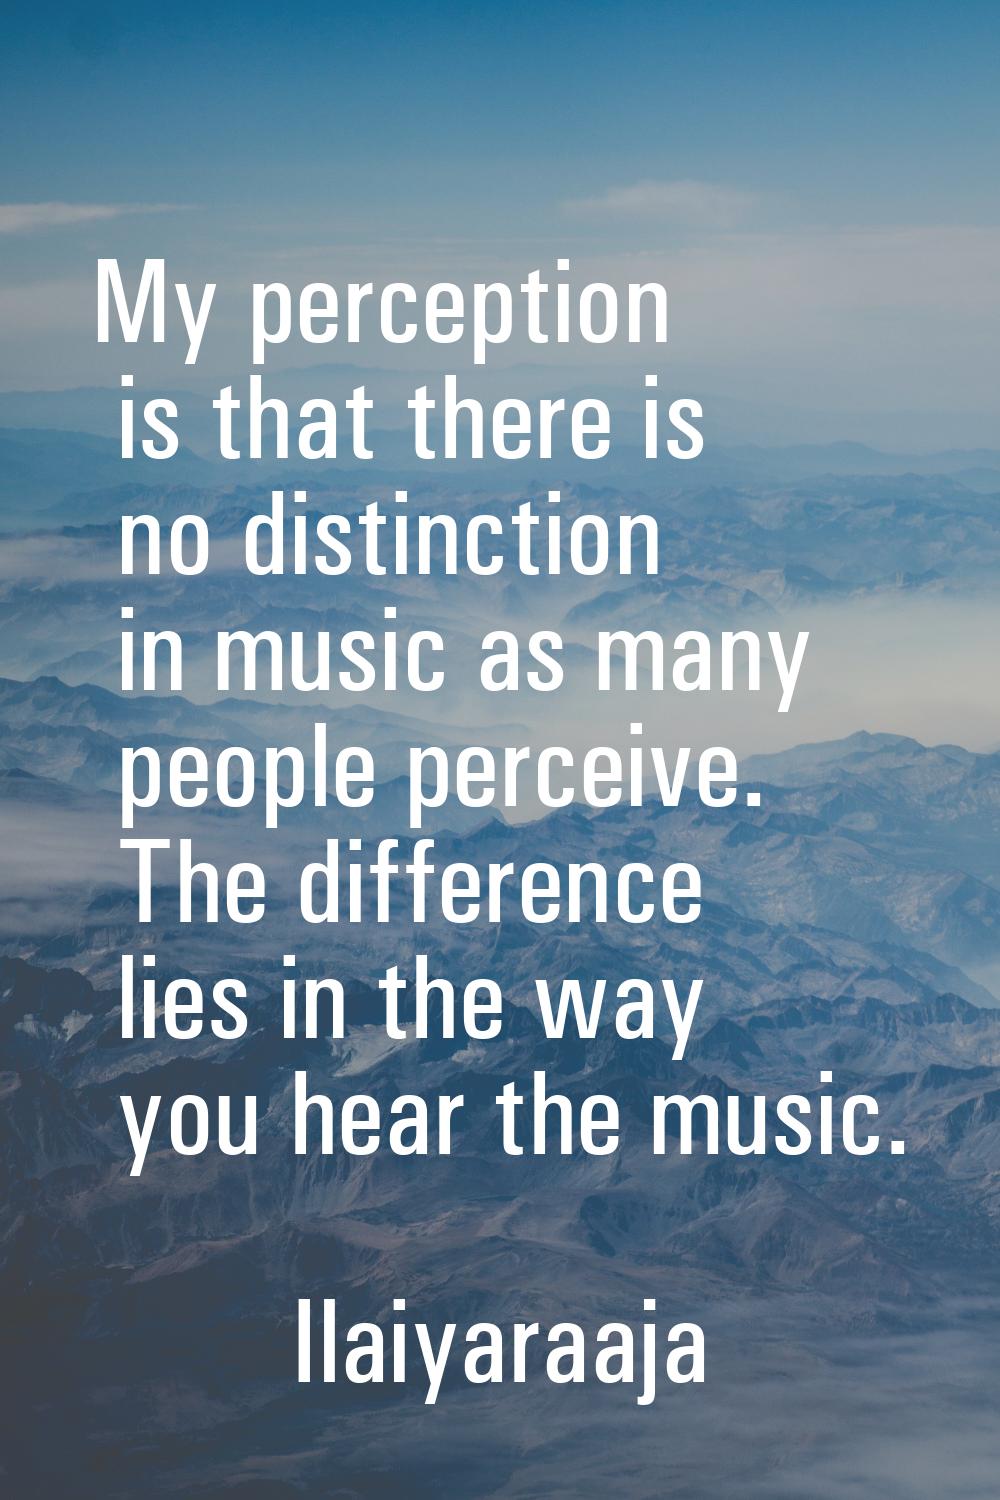 My perception is that there is no distinction in music as many people perceive. The difference lies